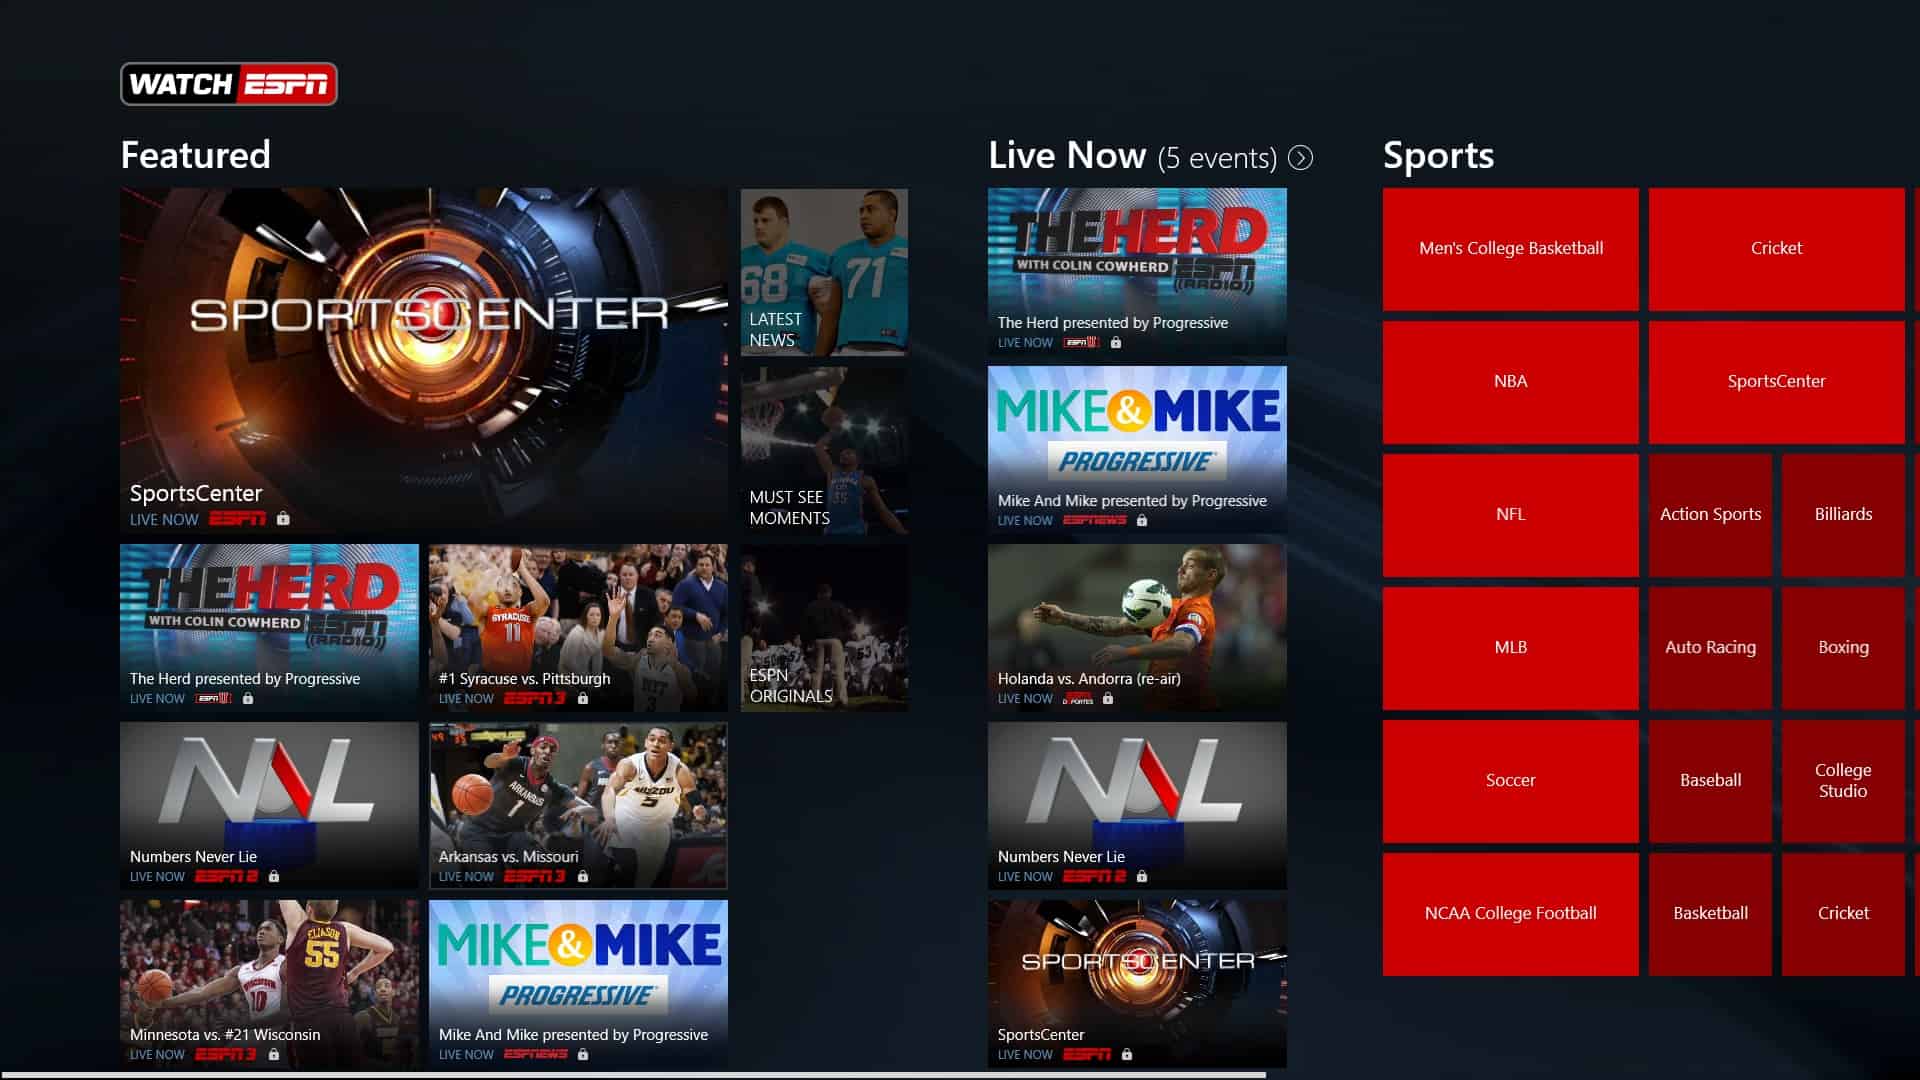 free sports streaming